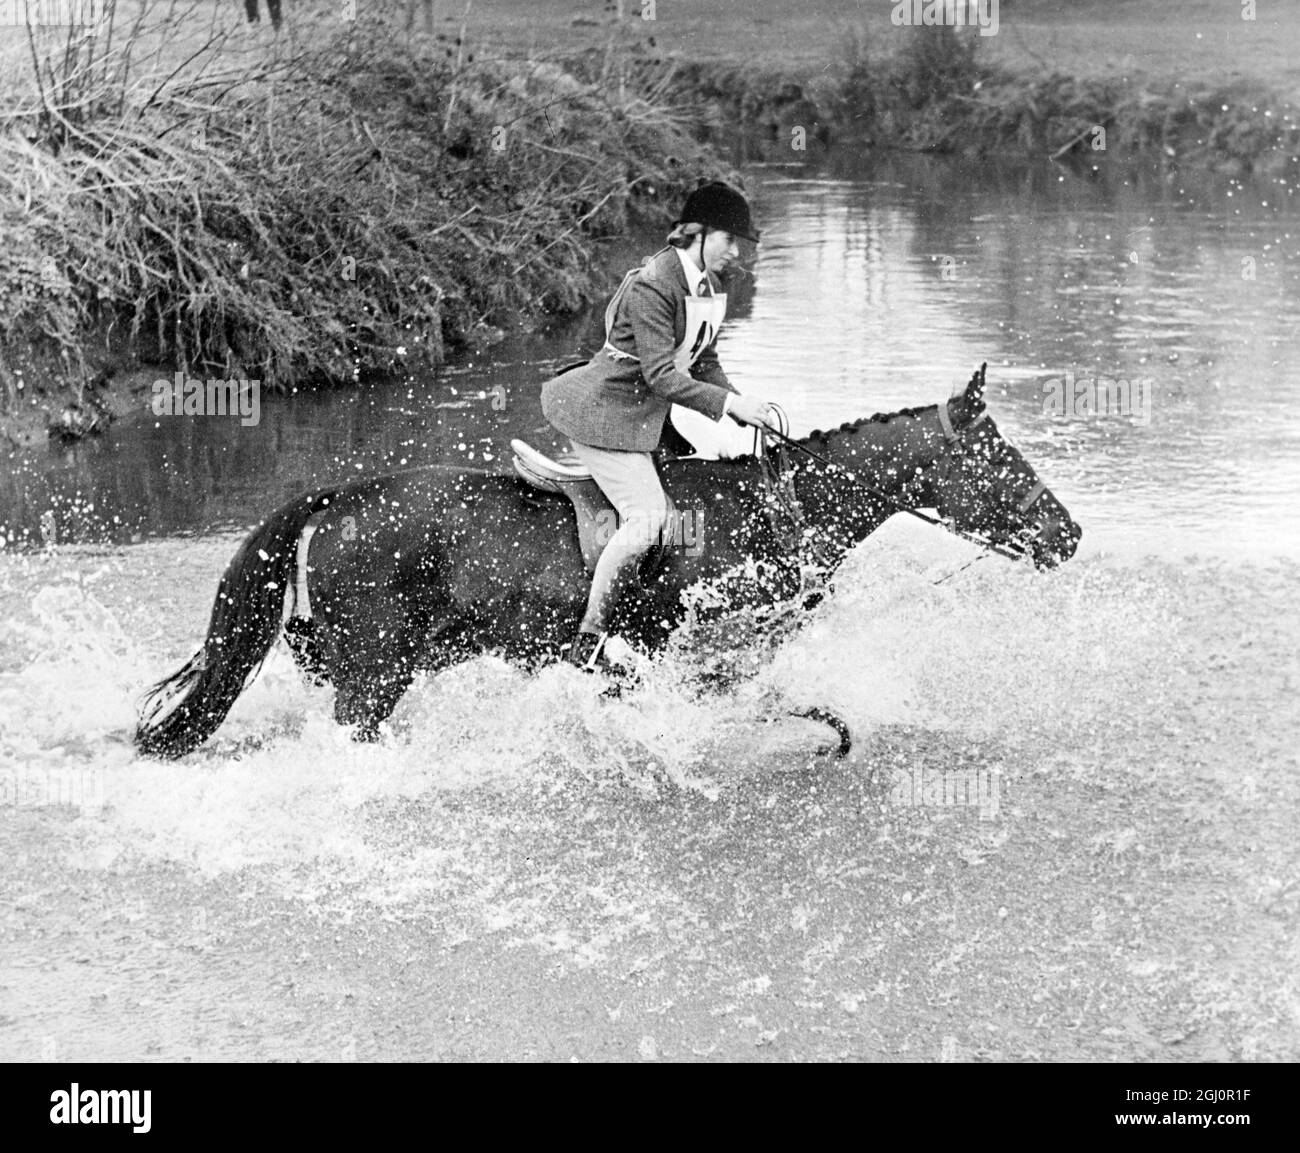 Intrepid Royal horsewoman . Reading, Berkshire : Fording the River Blackwater amidst a cloud of spray is Princess Anne , 15 , as she took part in the Staff College and Sandhurst Hunt's Pony Club Hunter Trials , at Hill Farm at Farley Hill , near Reading on Wednesday . Princess Anne , riding '' Blue Star '' , won the Open event for riders under 21 from a field of forty competitors . 6 April 1966 Stock Photo